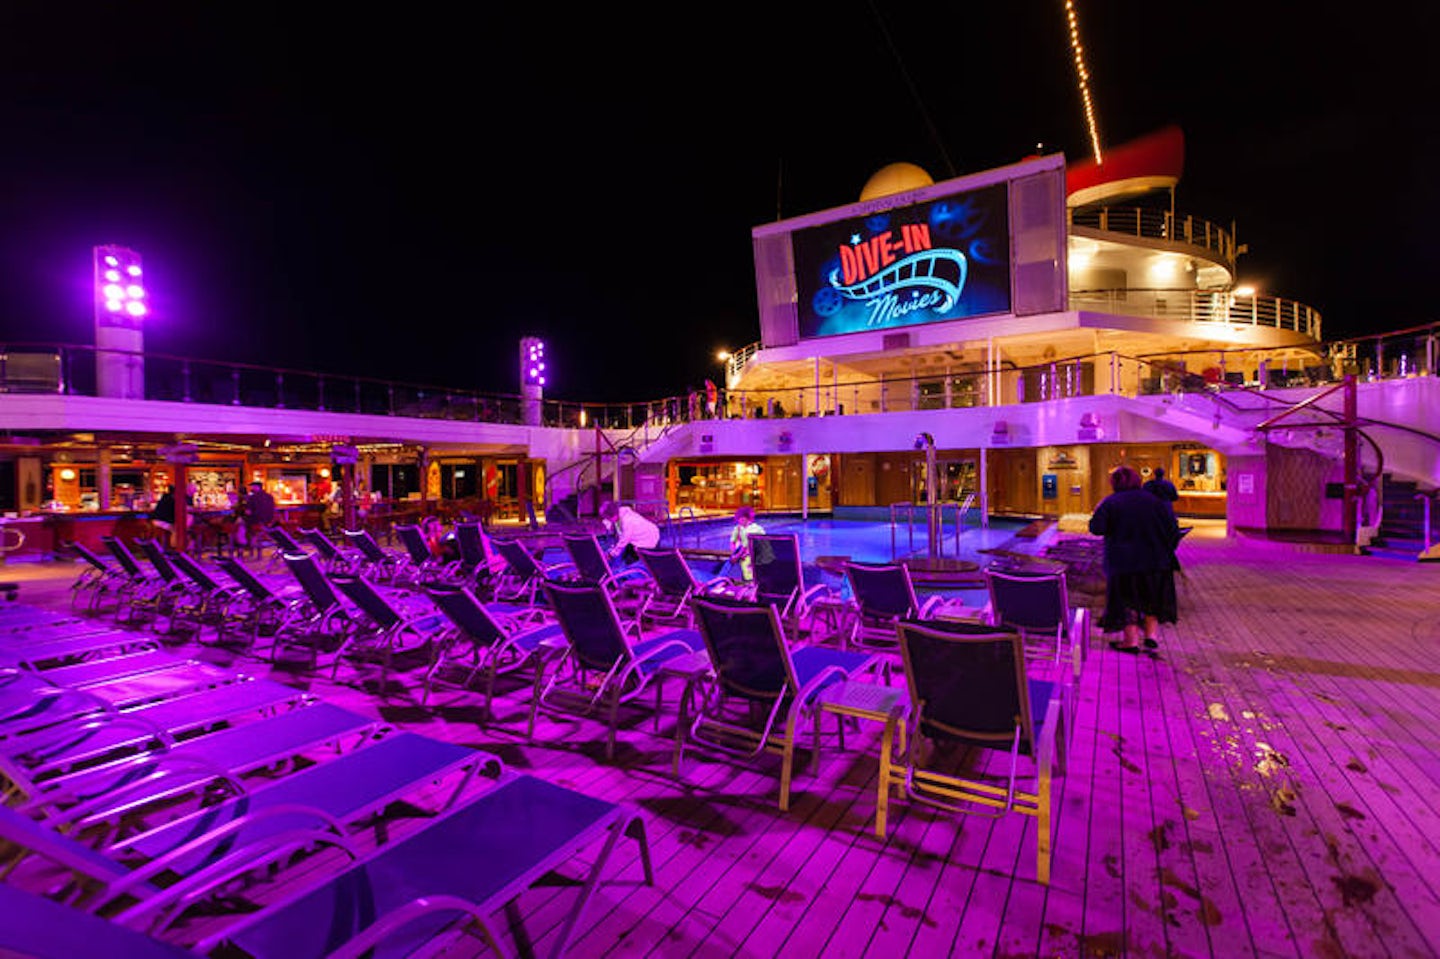 Dive-In Movies on Carnival Glory